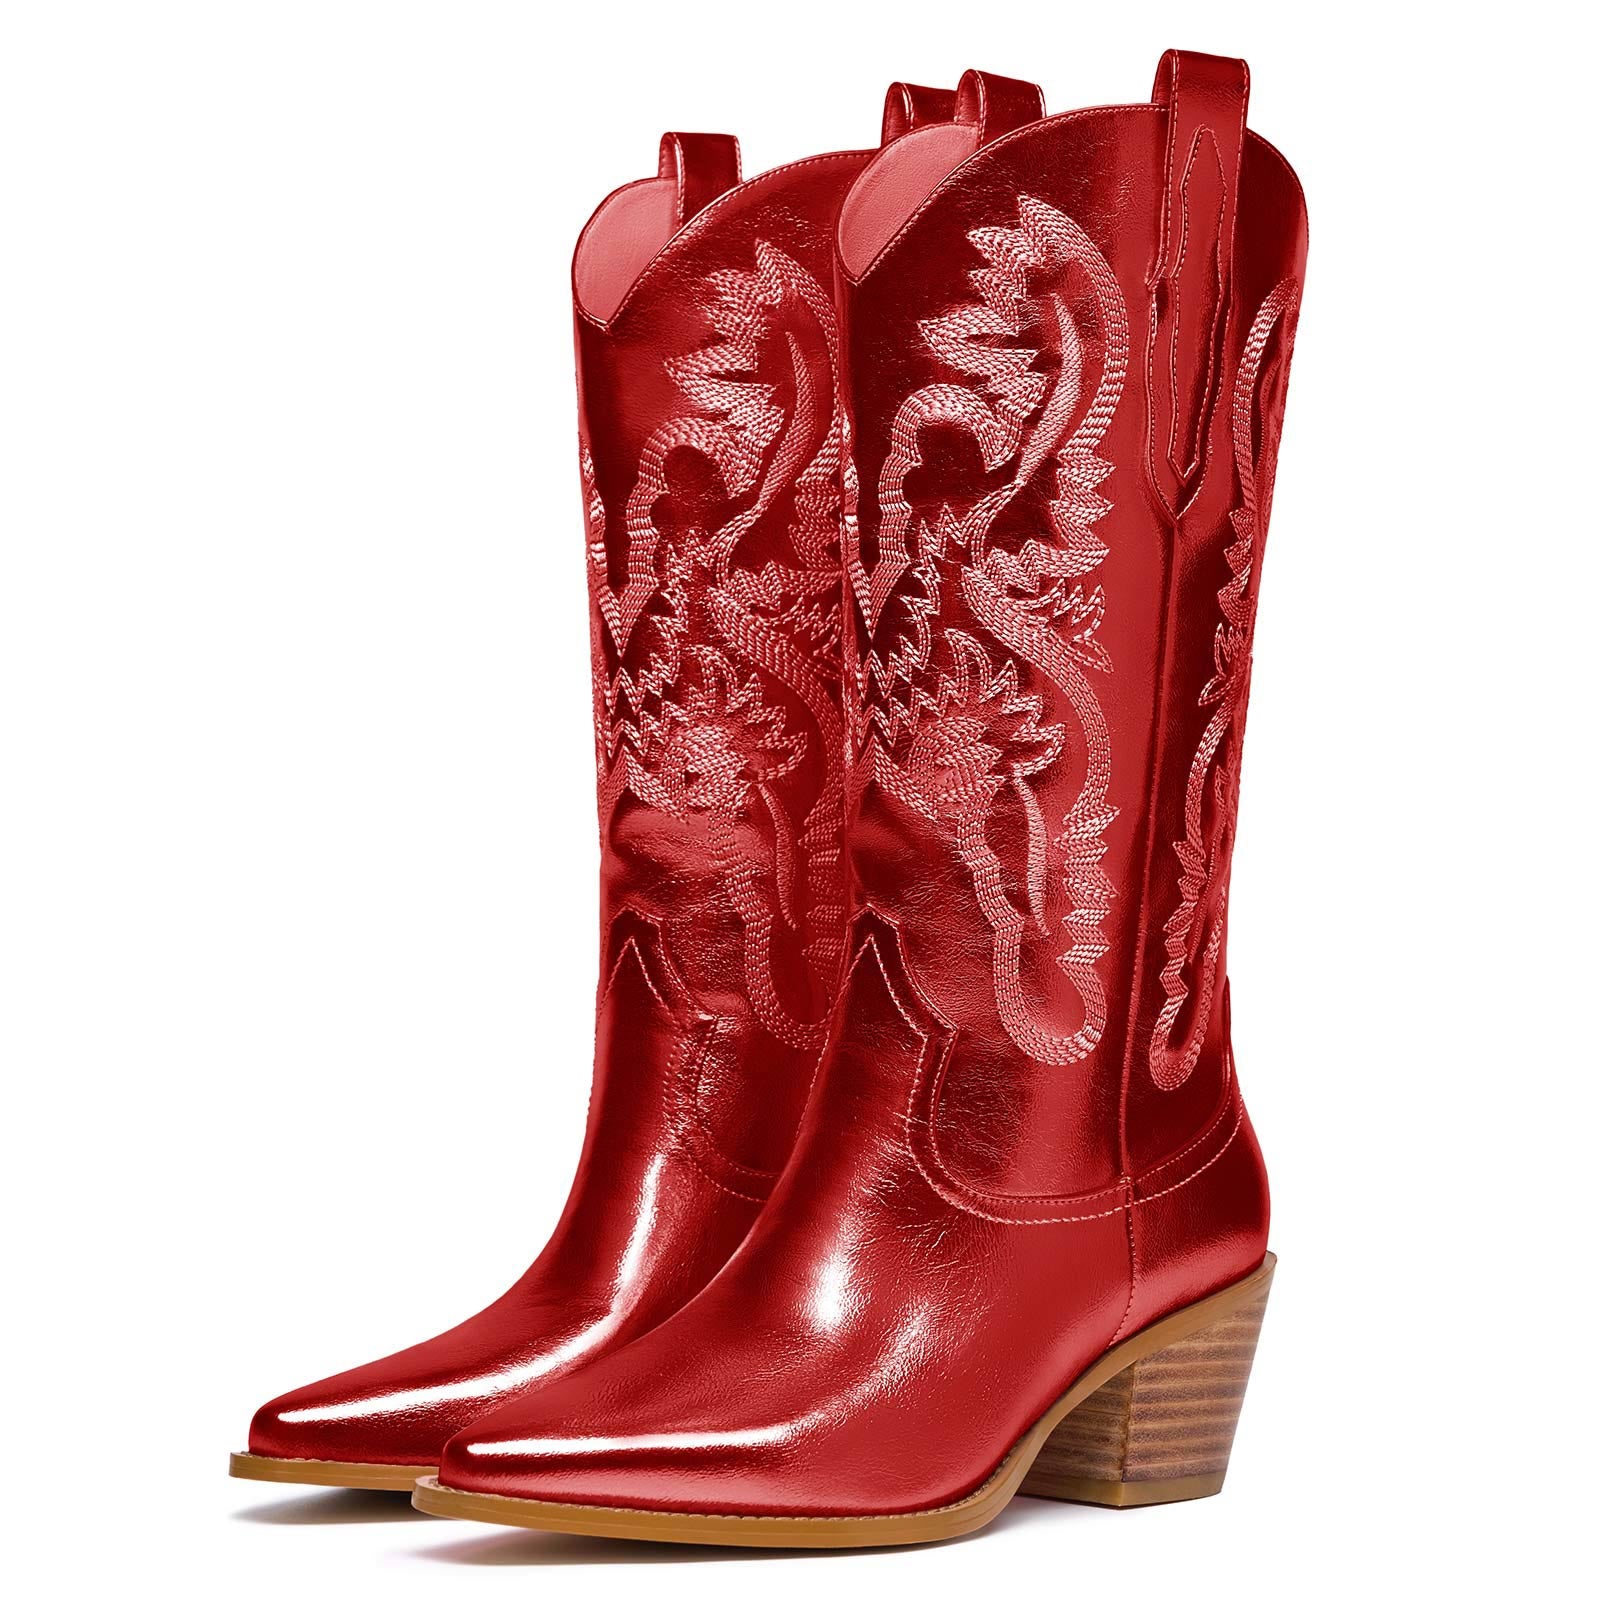 Western Embroidered Metallic Cowboy Mid Calf Boots